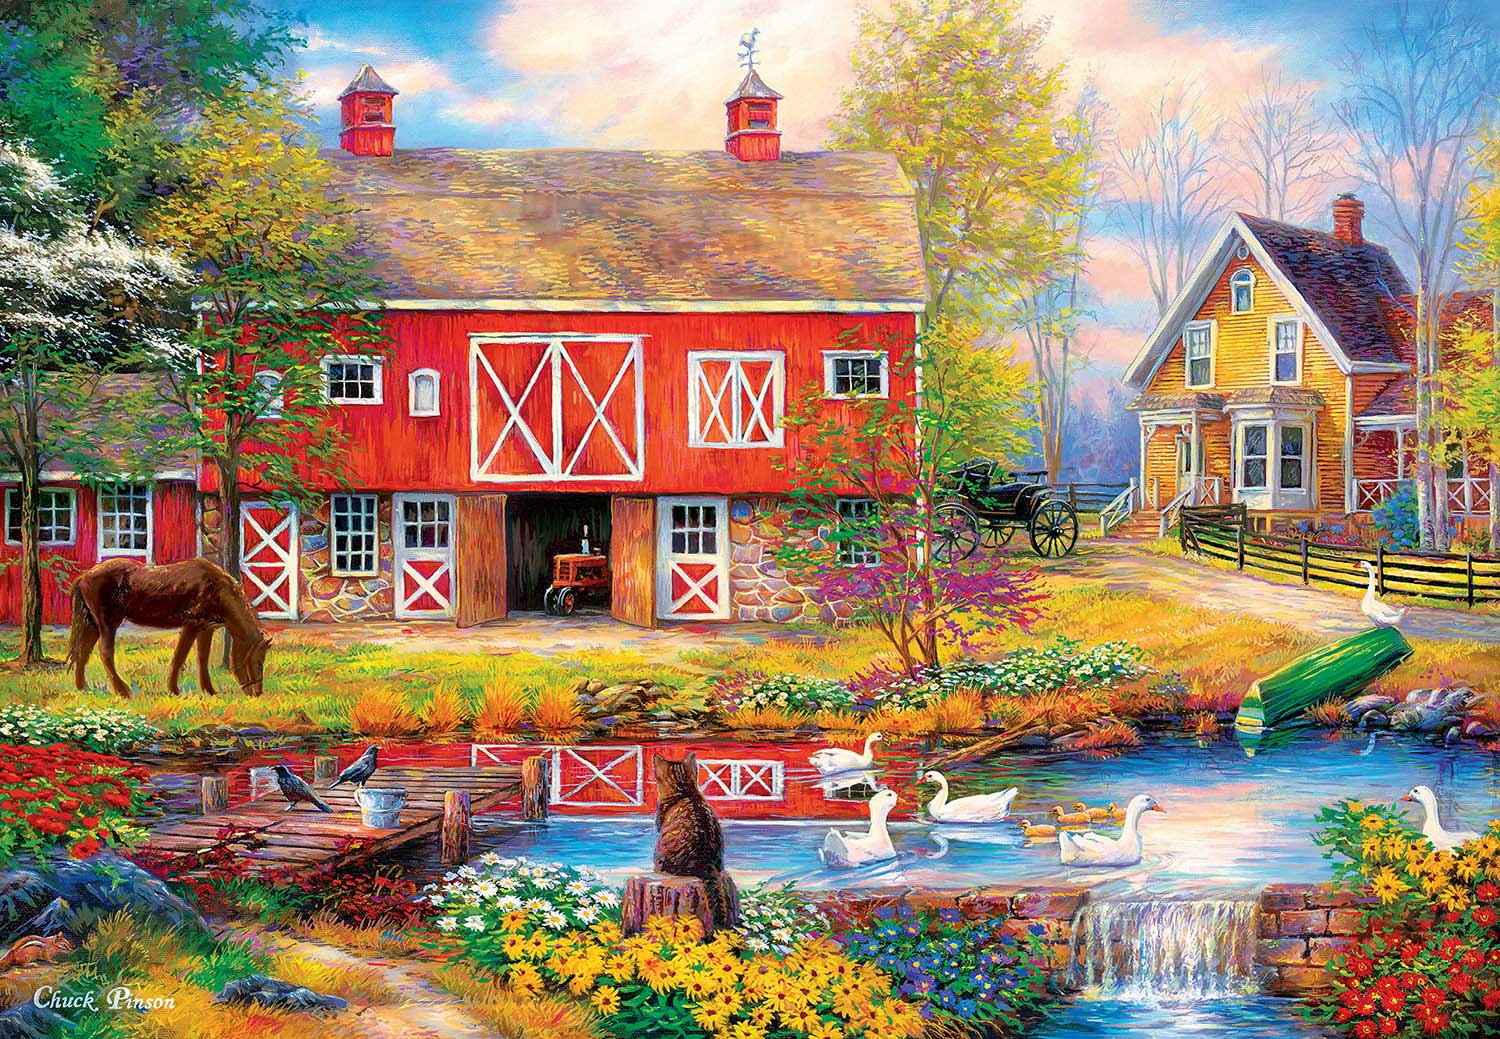 Reflections on Country Living Countryside Jigsaw Puzzle